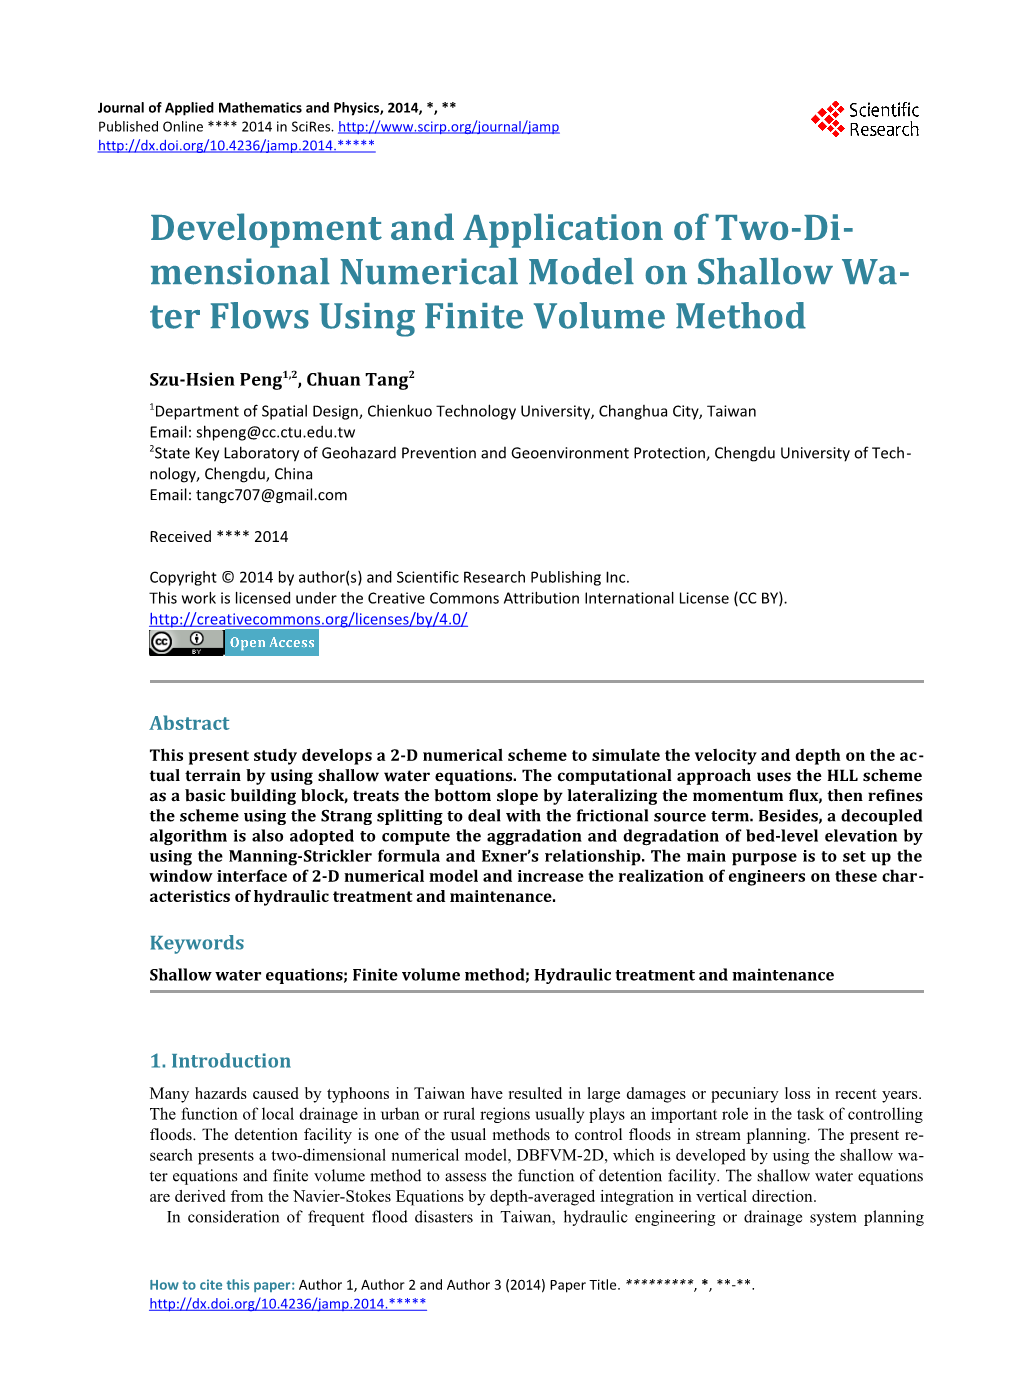 Development and Application of Two-Dimensional Numerical Model on Shallow Water Flows